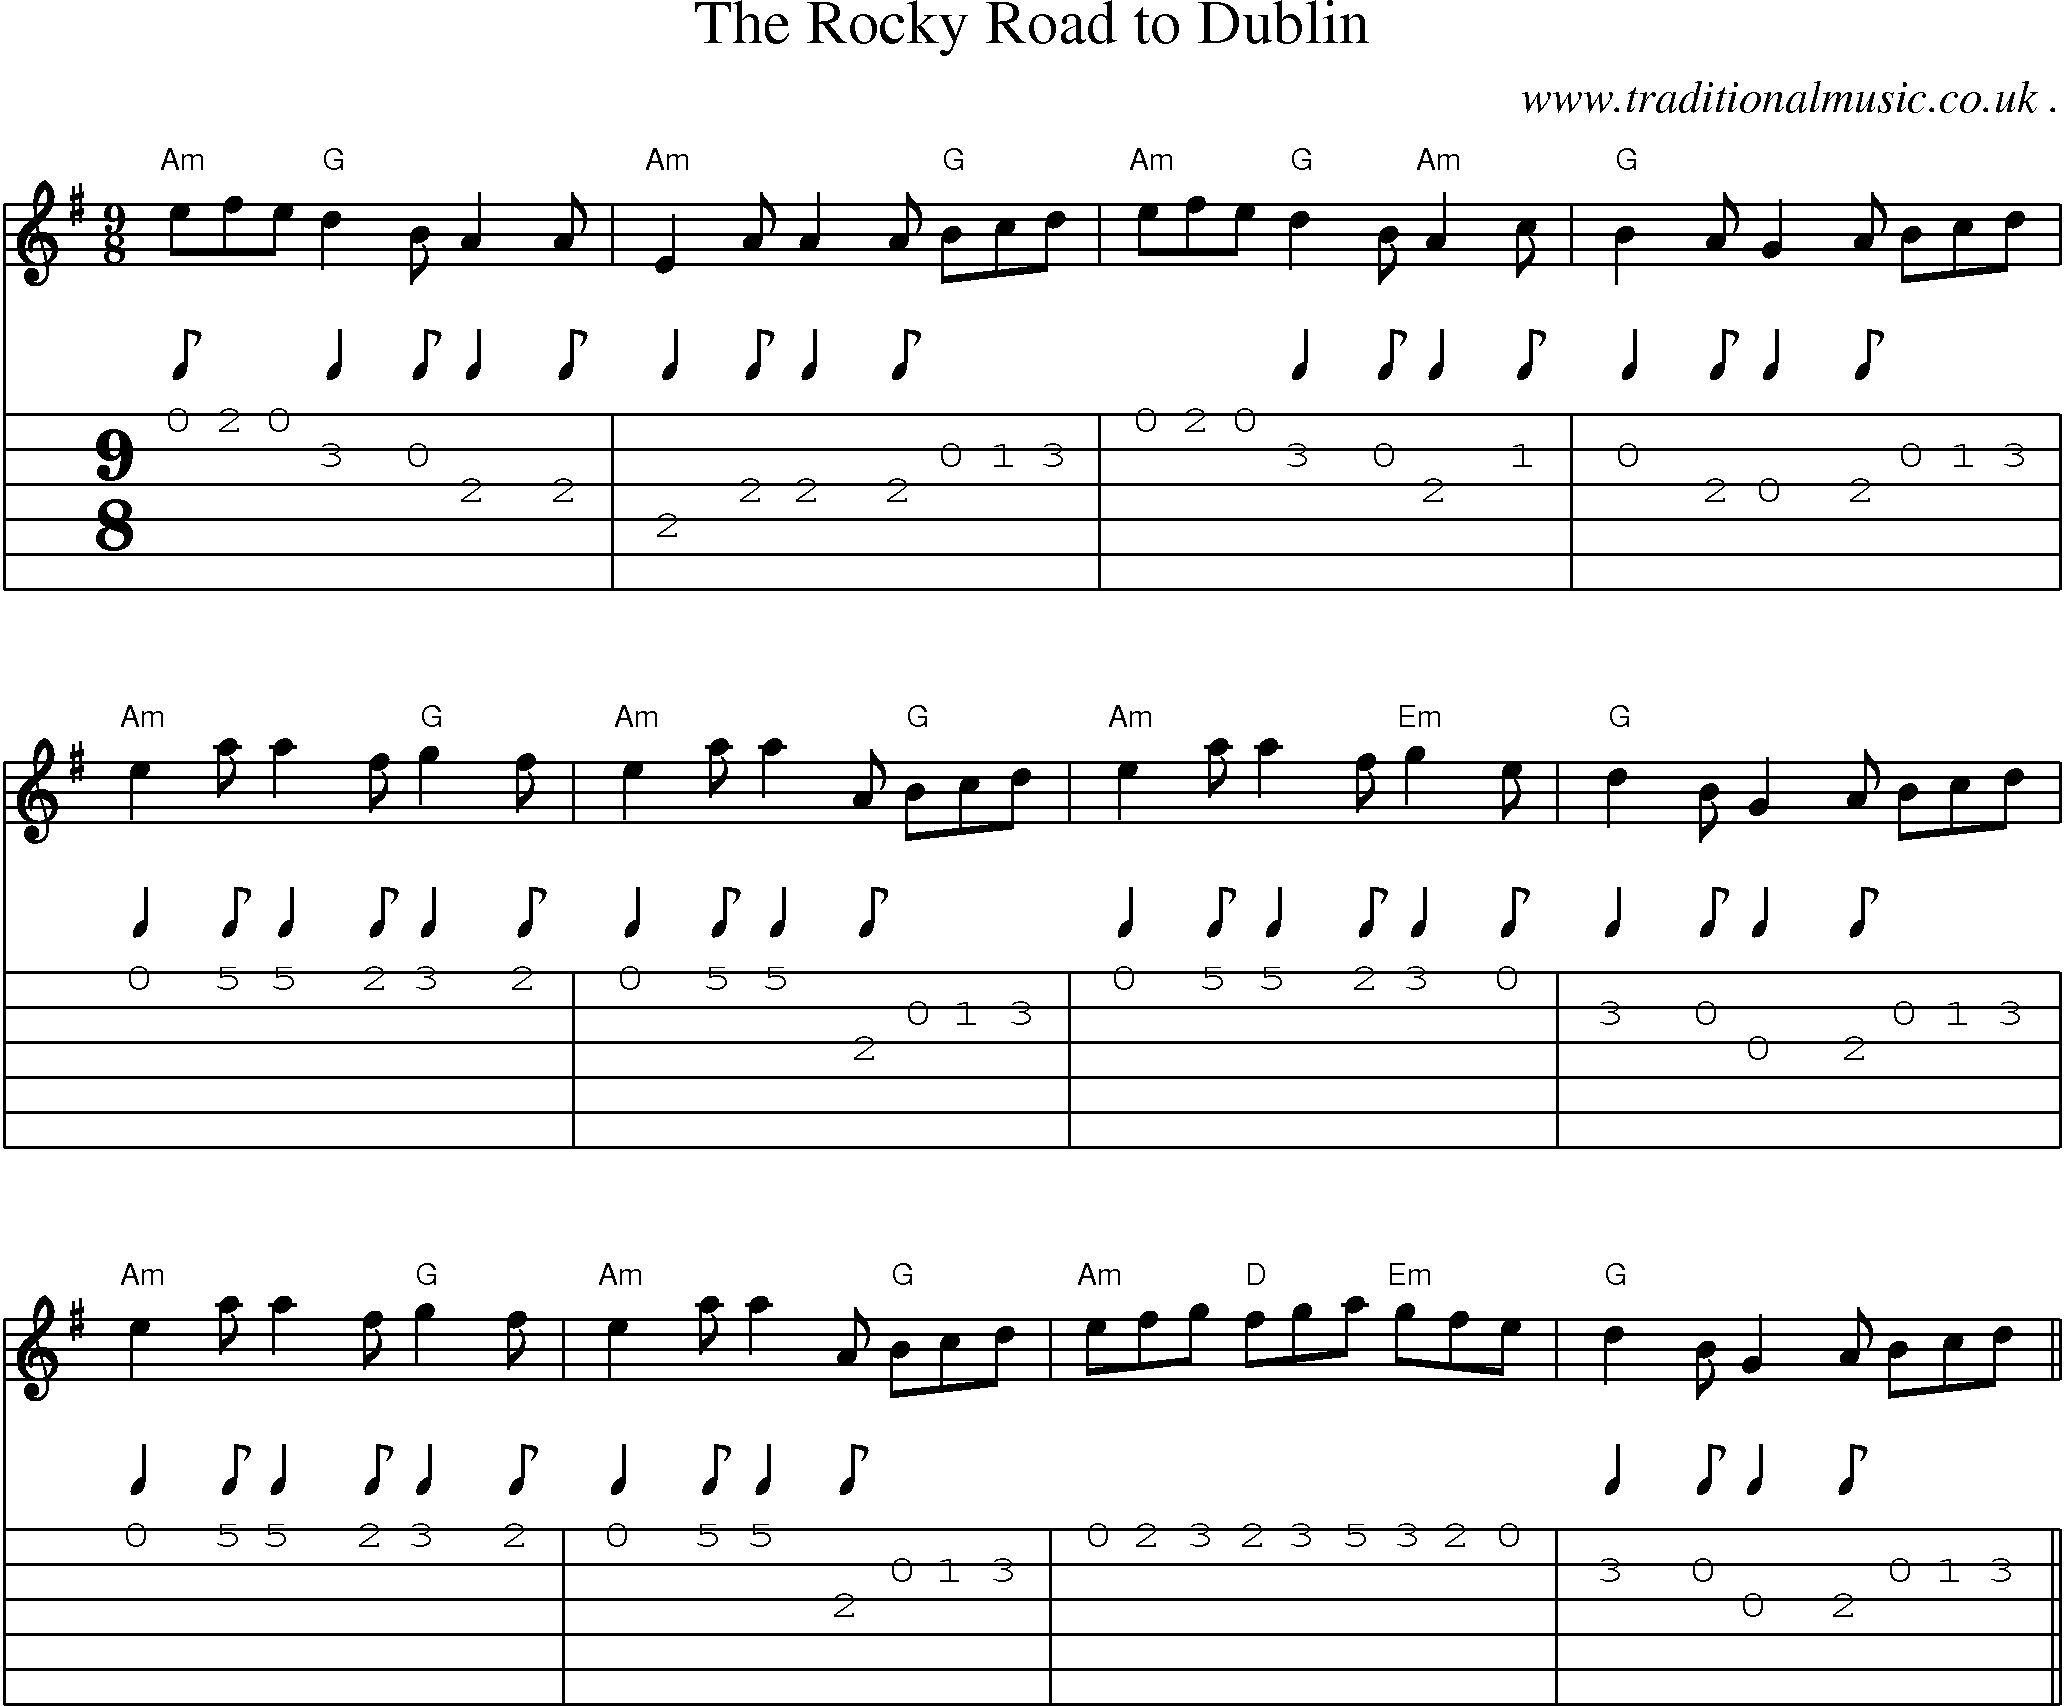 Music Score and Guitar Tabs for The Rocky Road To Dublin